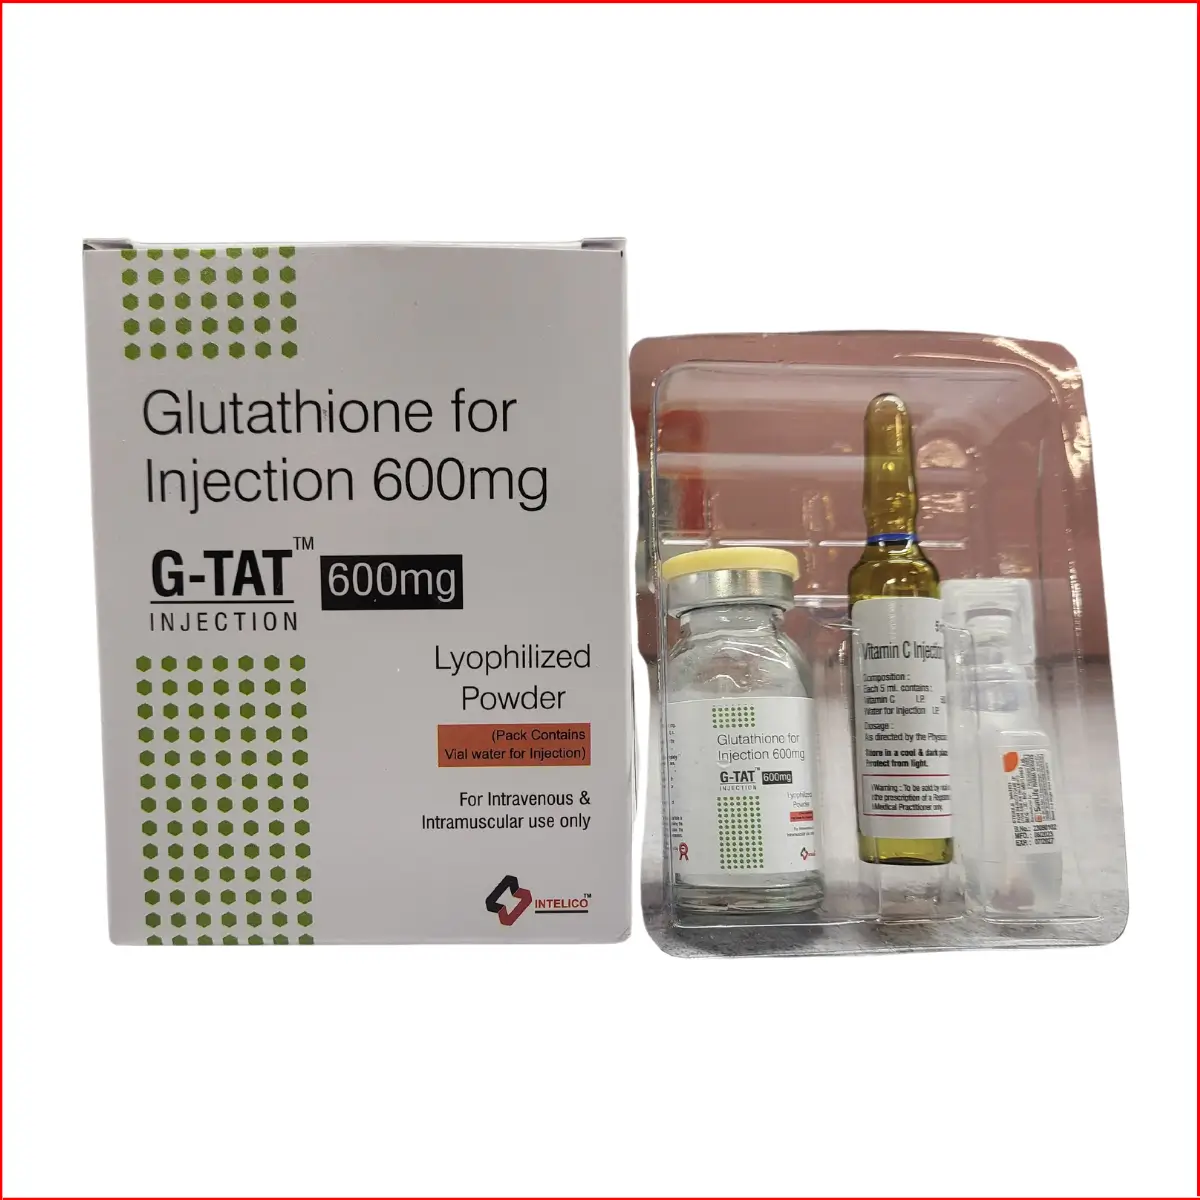 Glutathione for injection 600mg